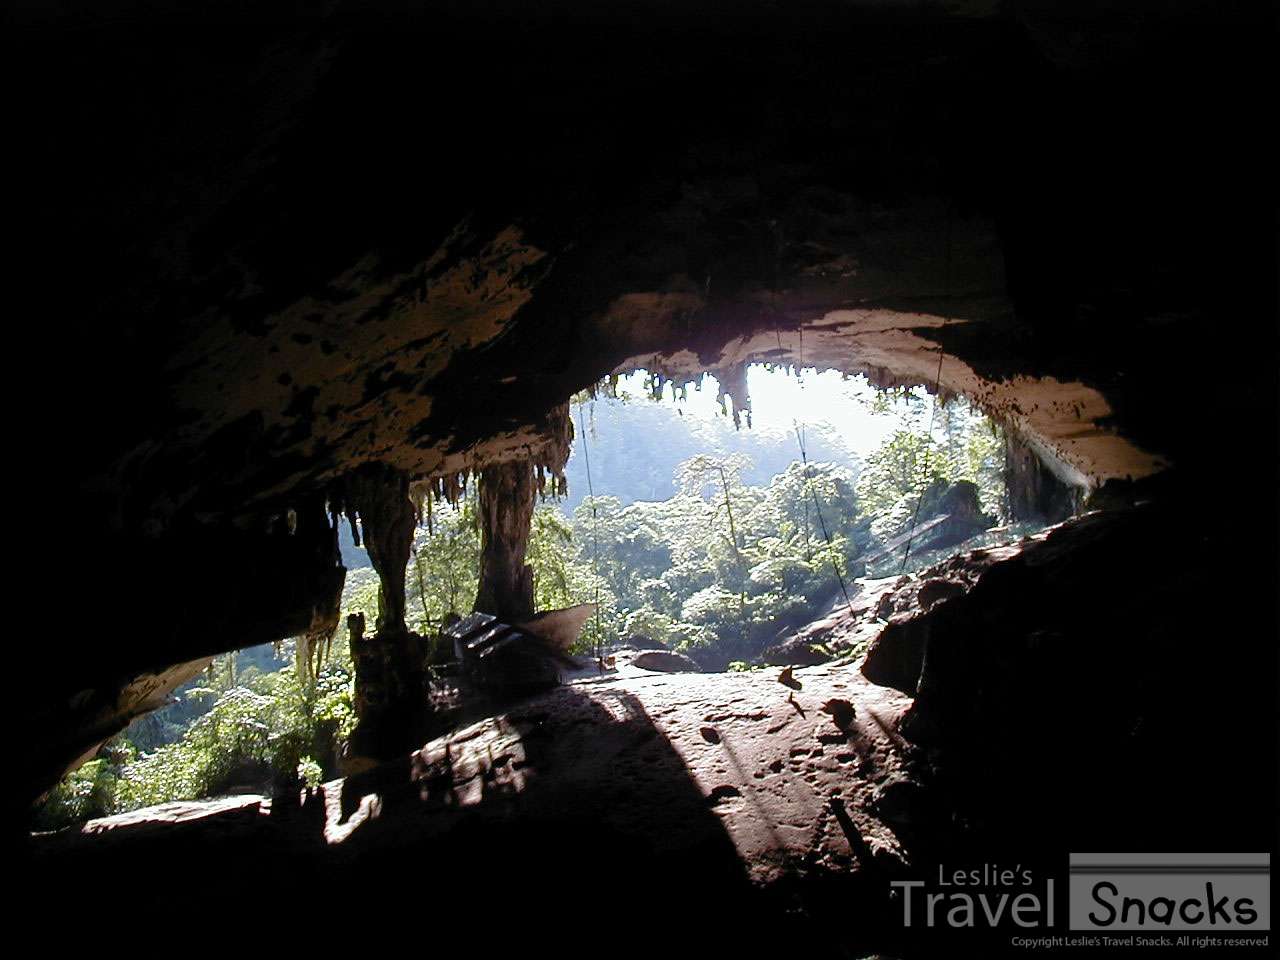 Giant Miri Cave. The long poles are to climb up to get the bird nests for bird nest soup!